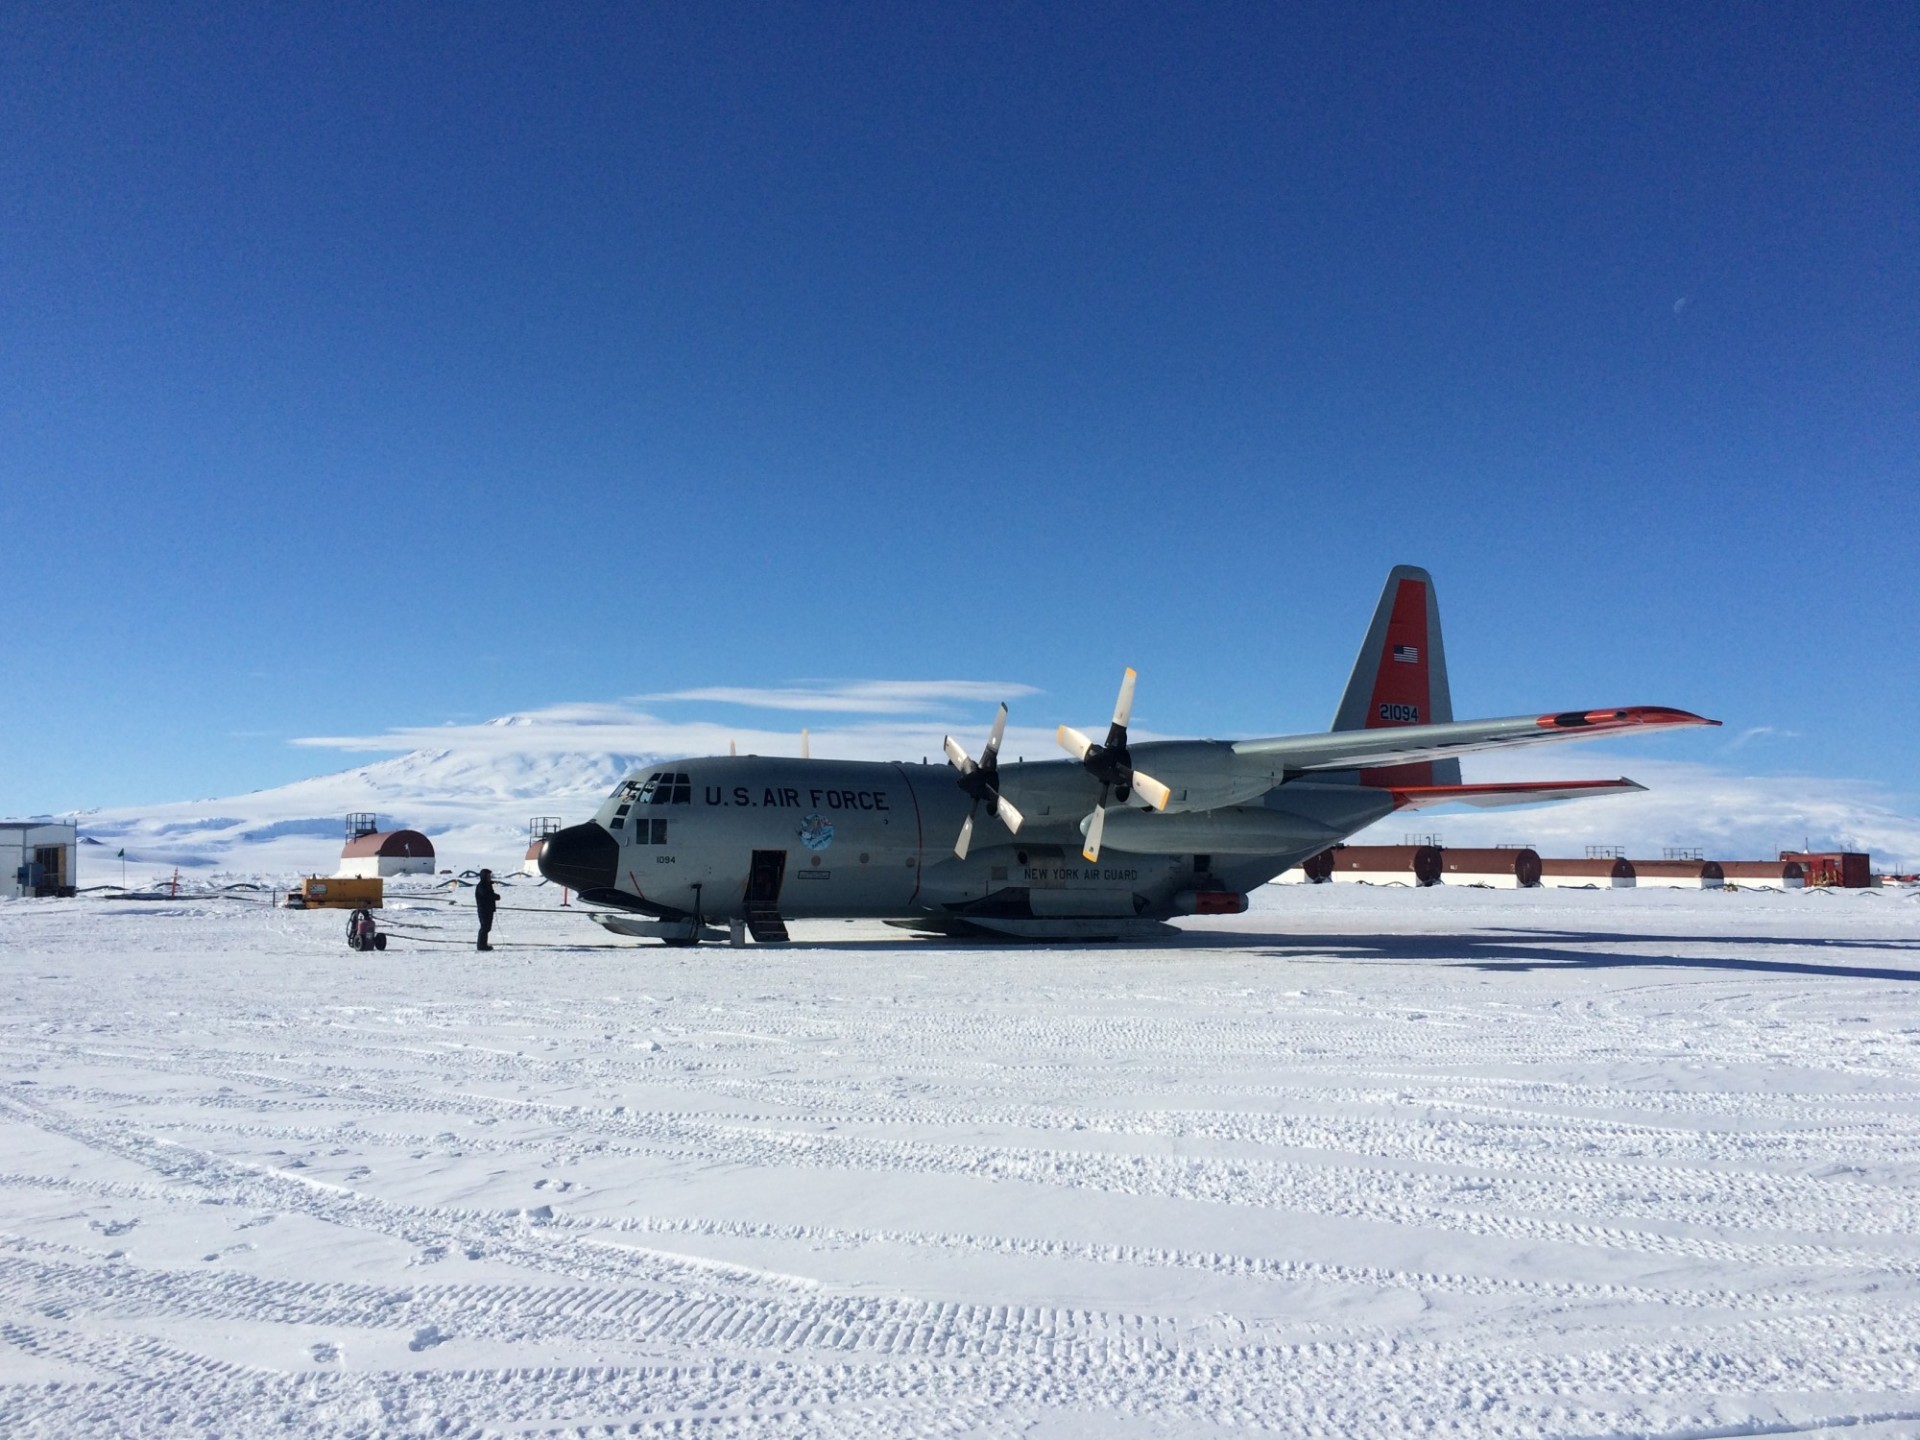 IcePod attached to LC-130 aircraft at Williams Field in Antarctica. Credit: Caitlin Locke